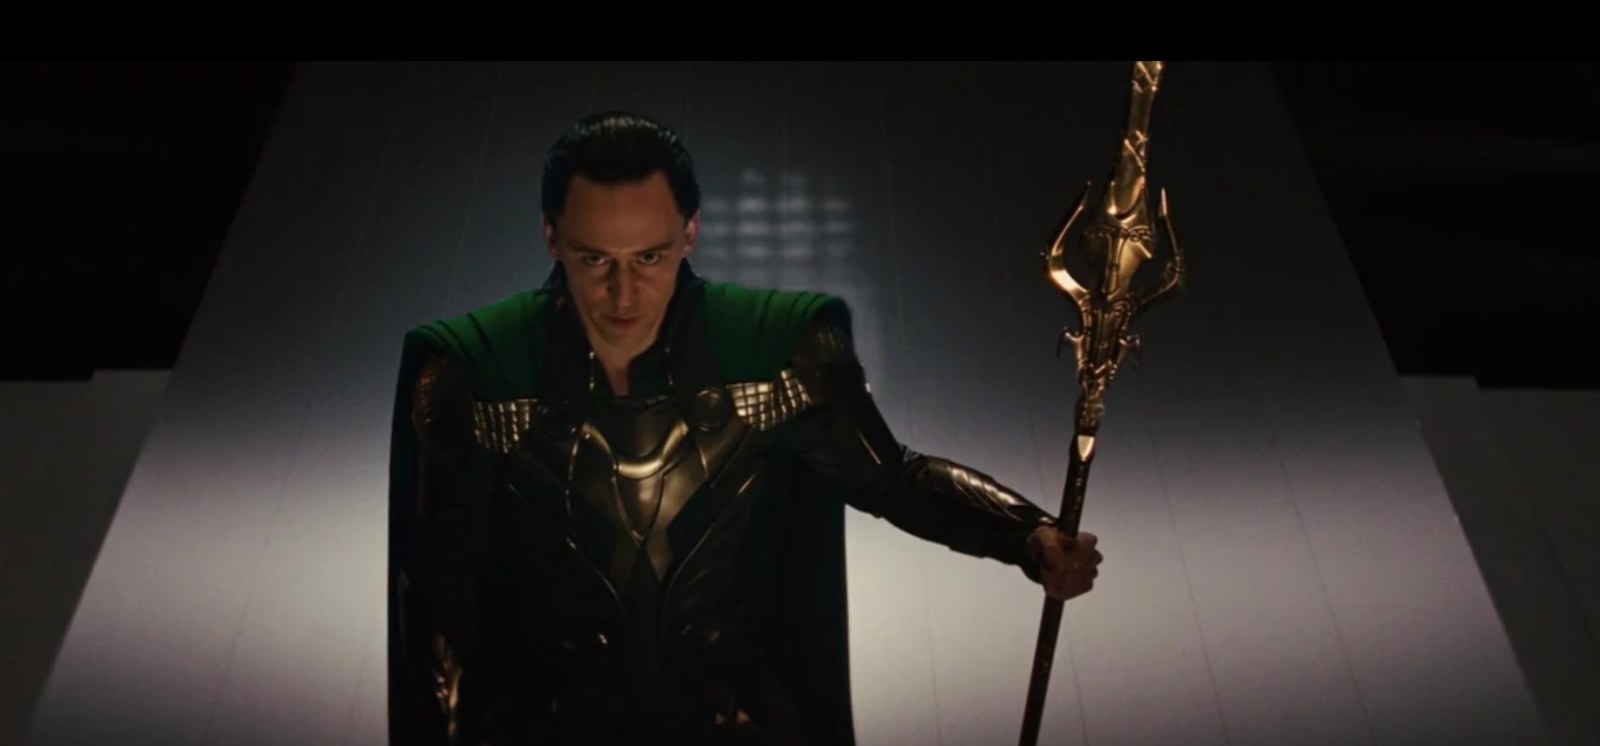 loki stands with his staff in hand